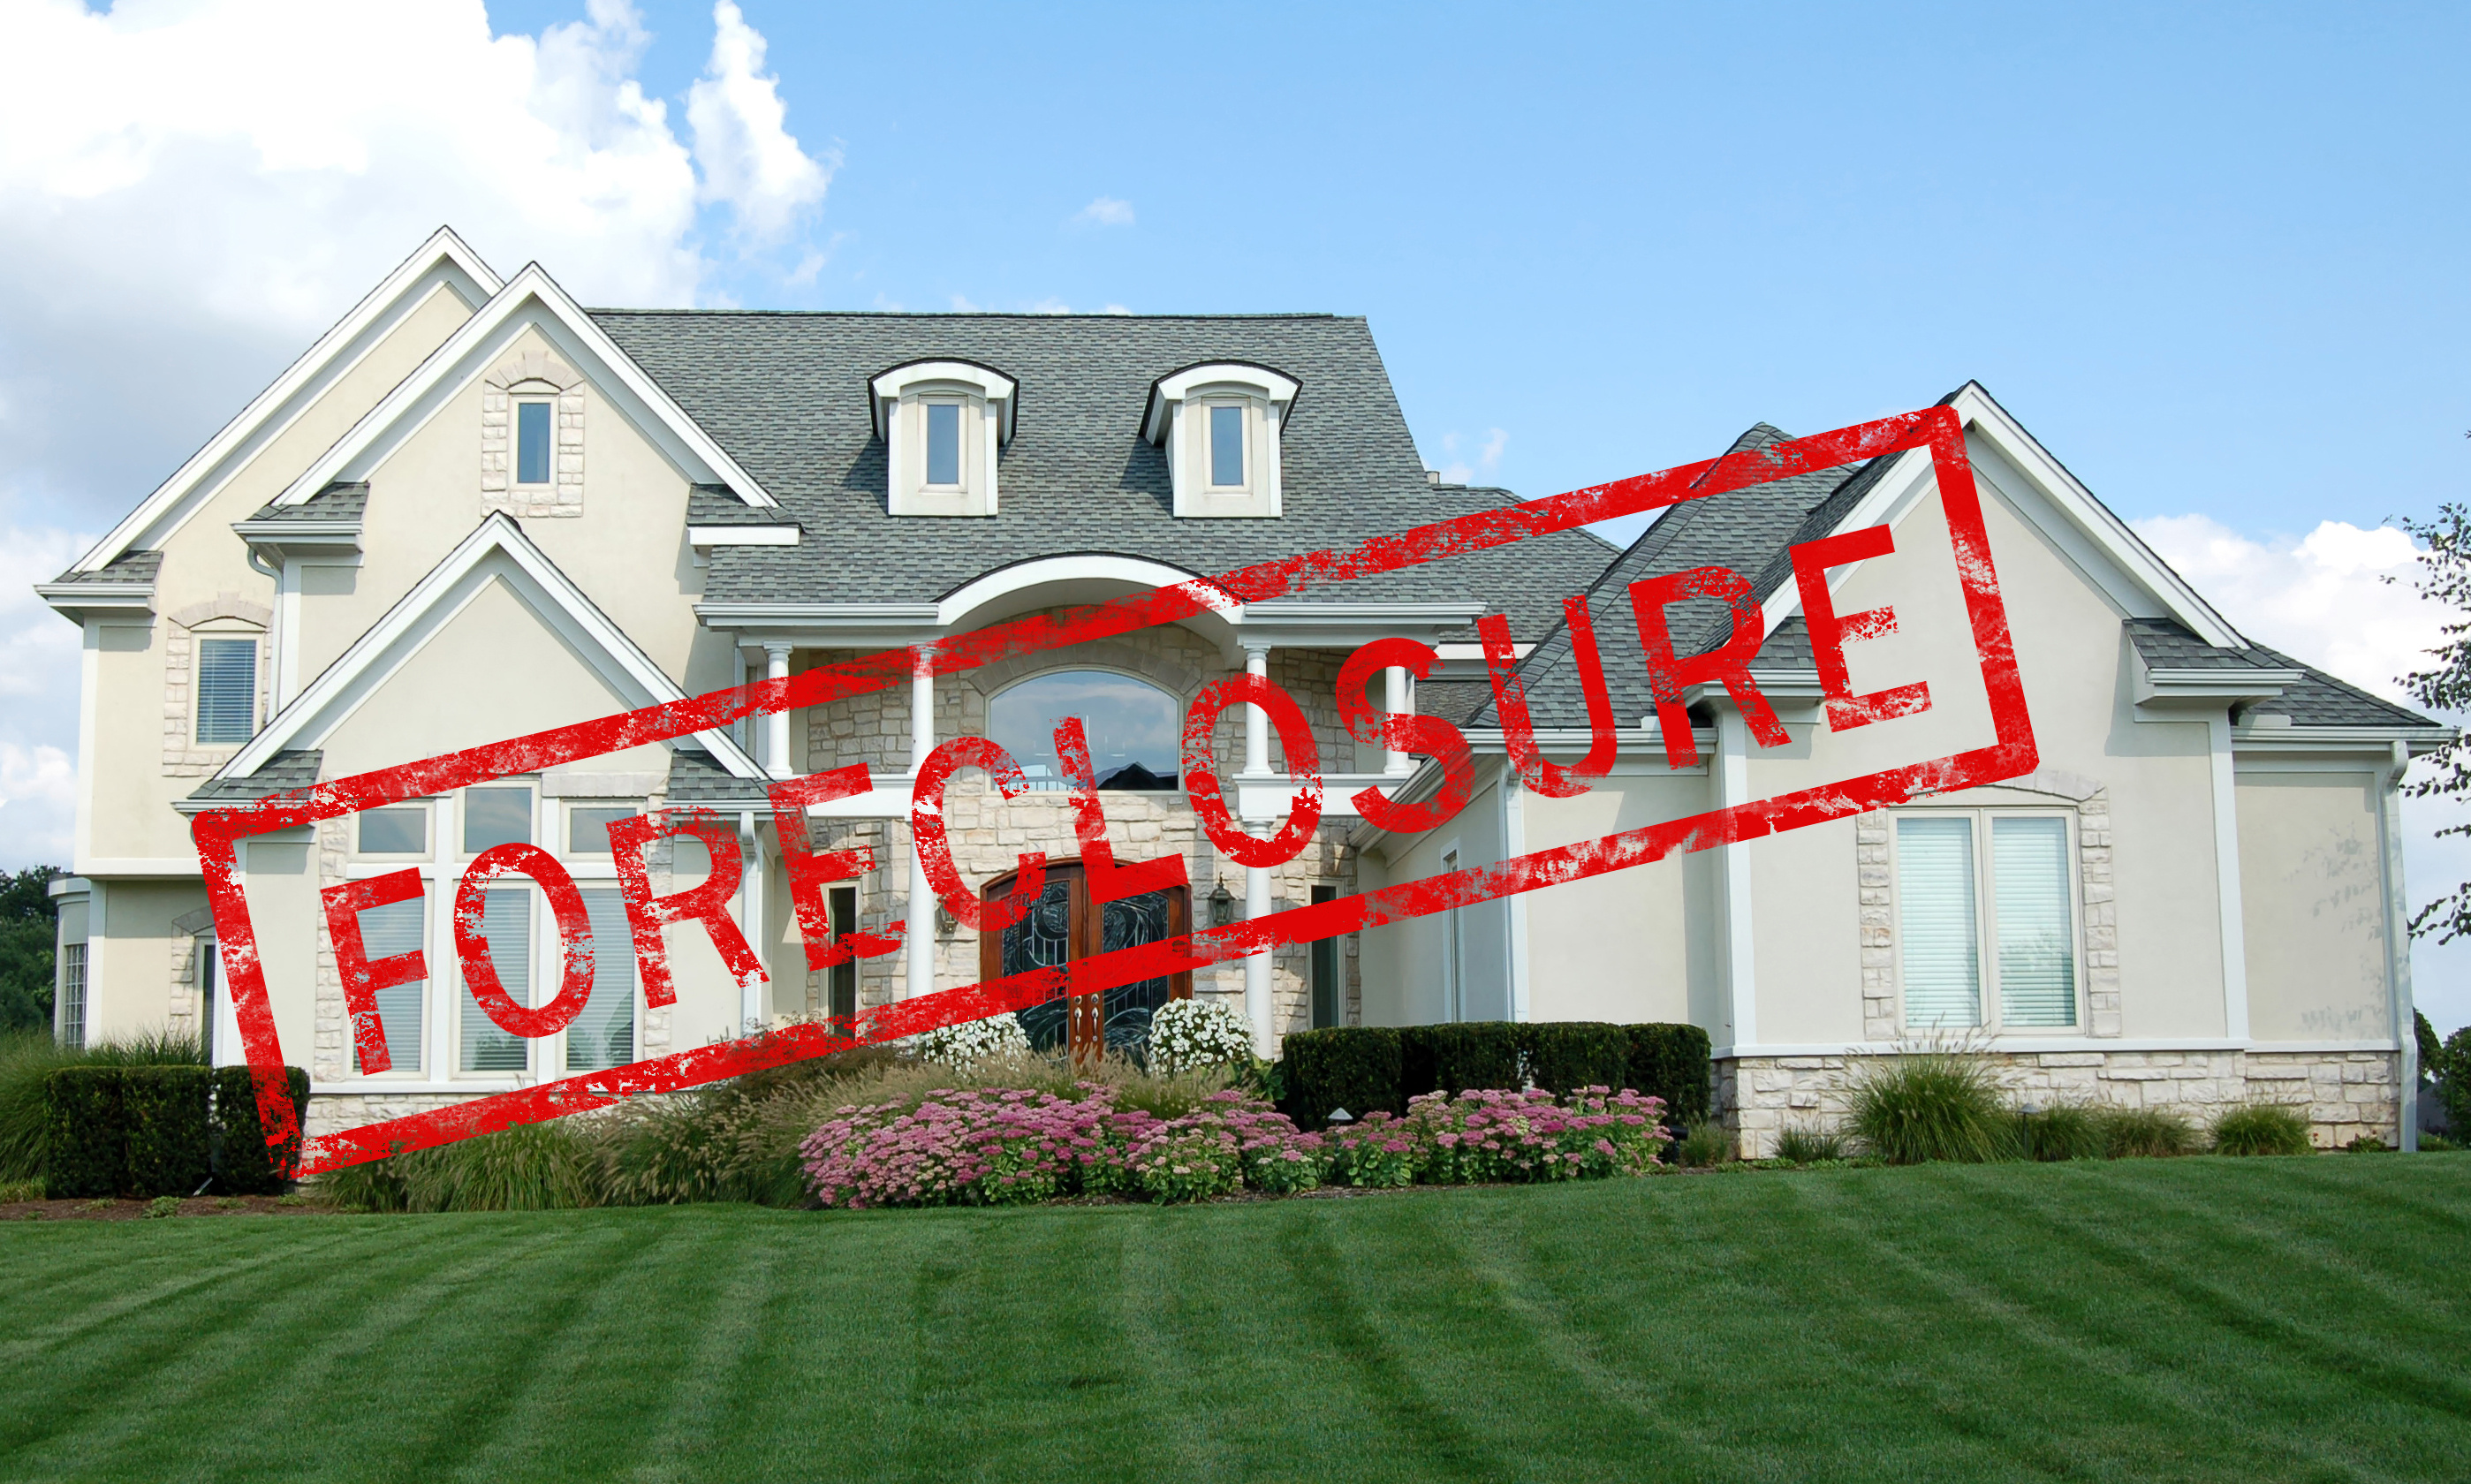 Call H.M. Hoffman & Company to order valuations on Montgomery foreclosures